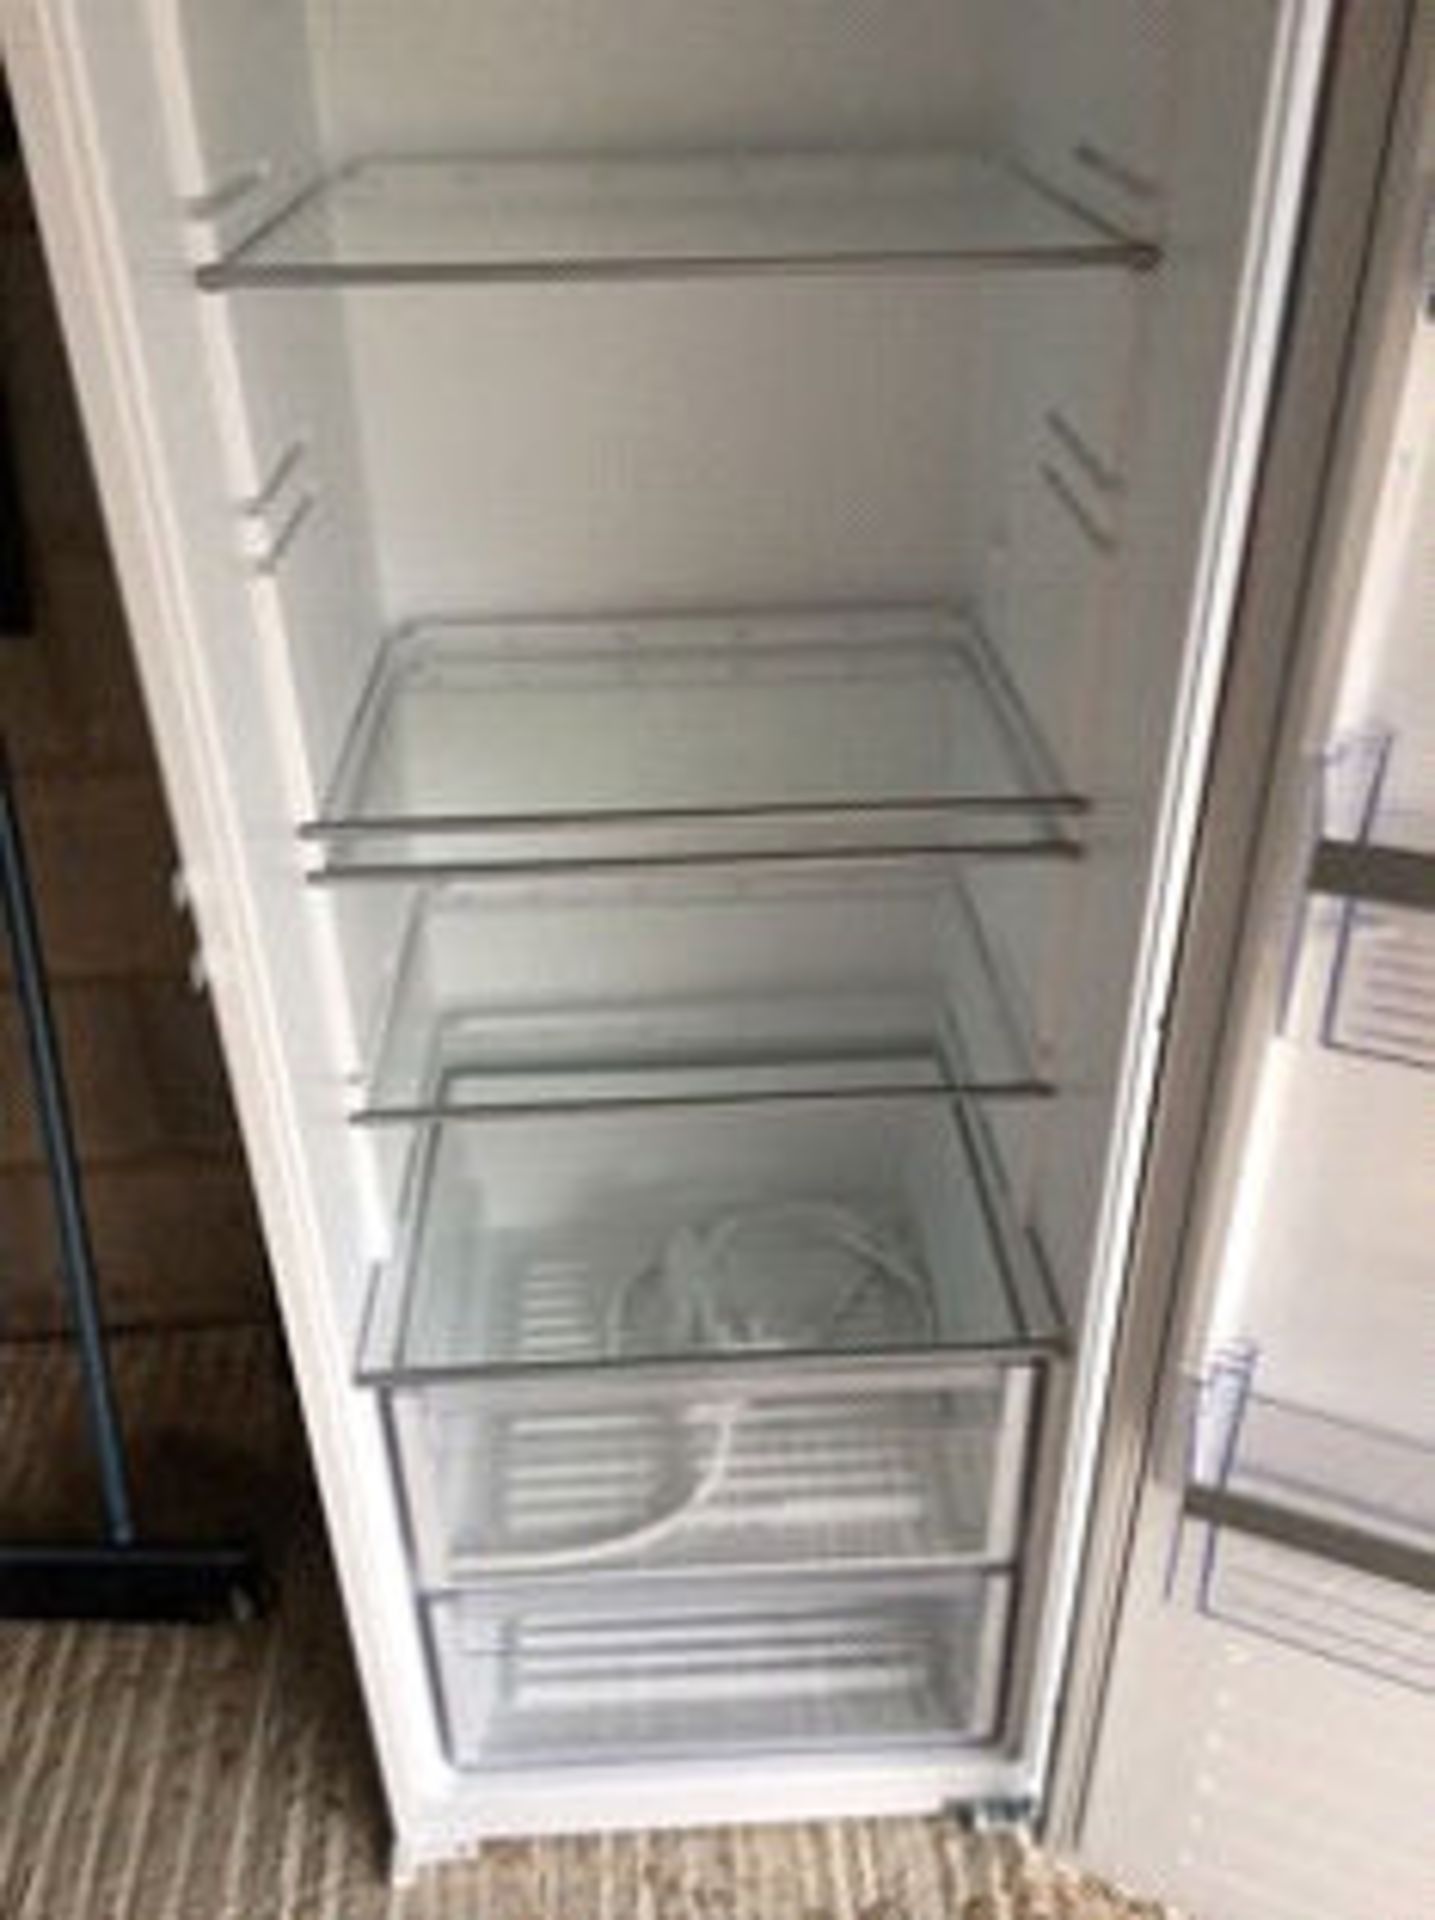 1 x NEFF KI1812S30G Integrated Tall Fridge - Only 6 Months Old - CL252 - Location: Longton, PR4 - NO - Image 5 of 6